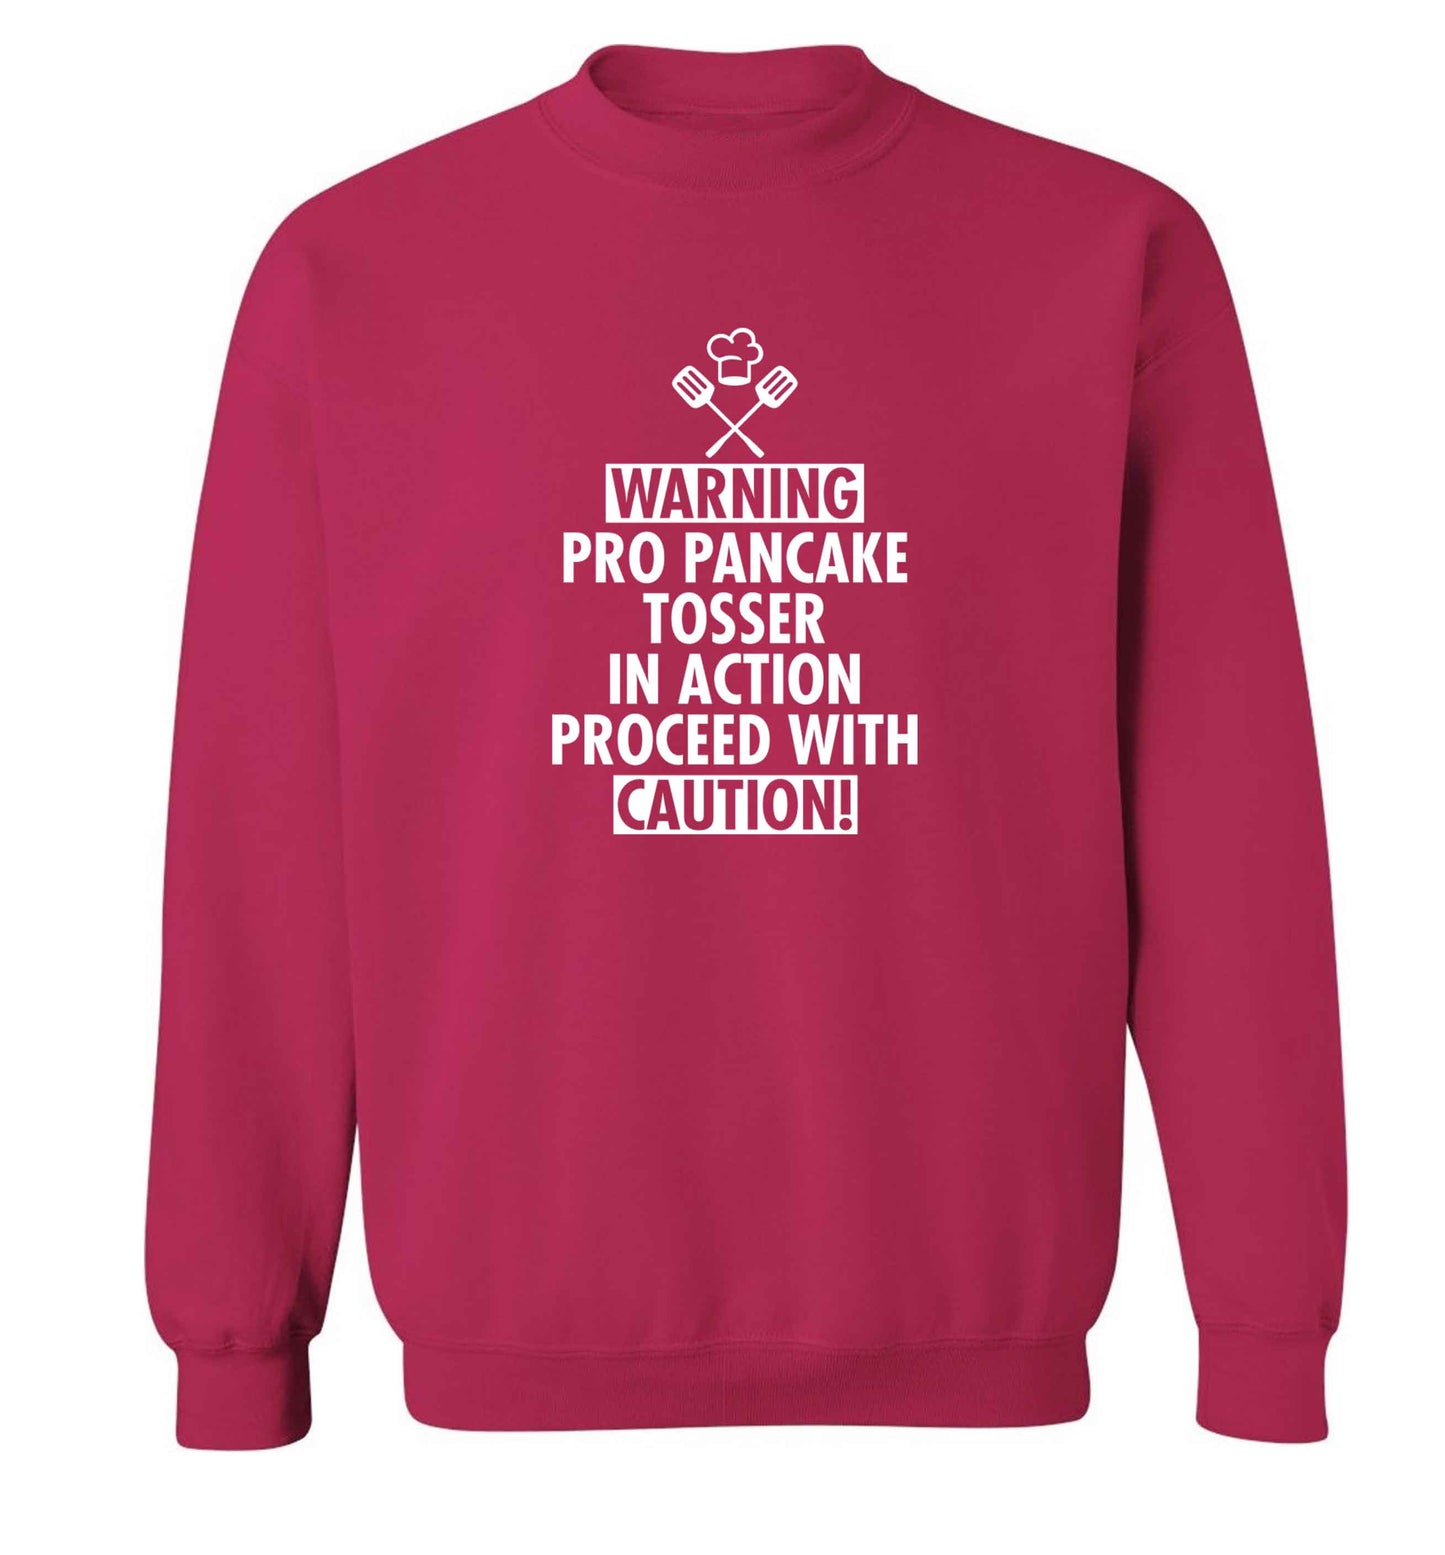 Warning pro pancake tosser in action proceed with caution adult's unisex pink sweater 2XL